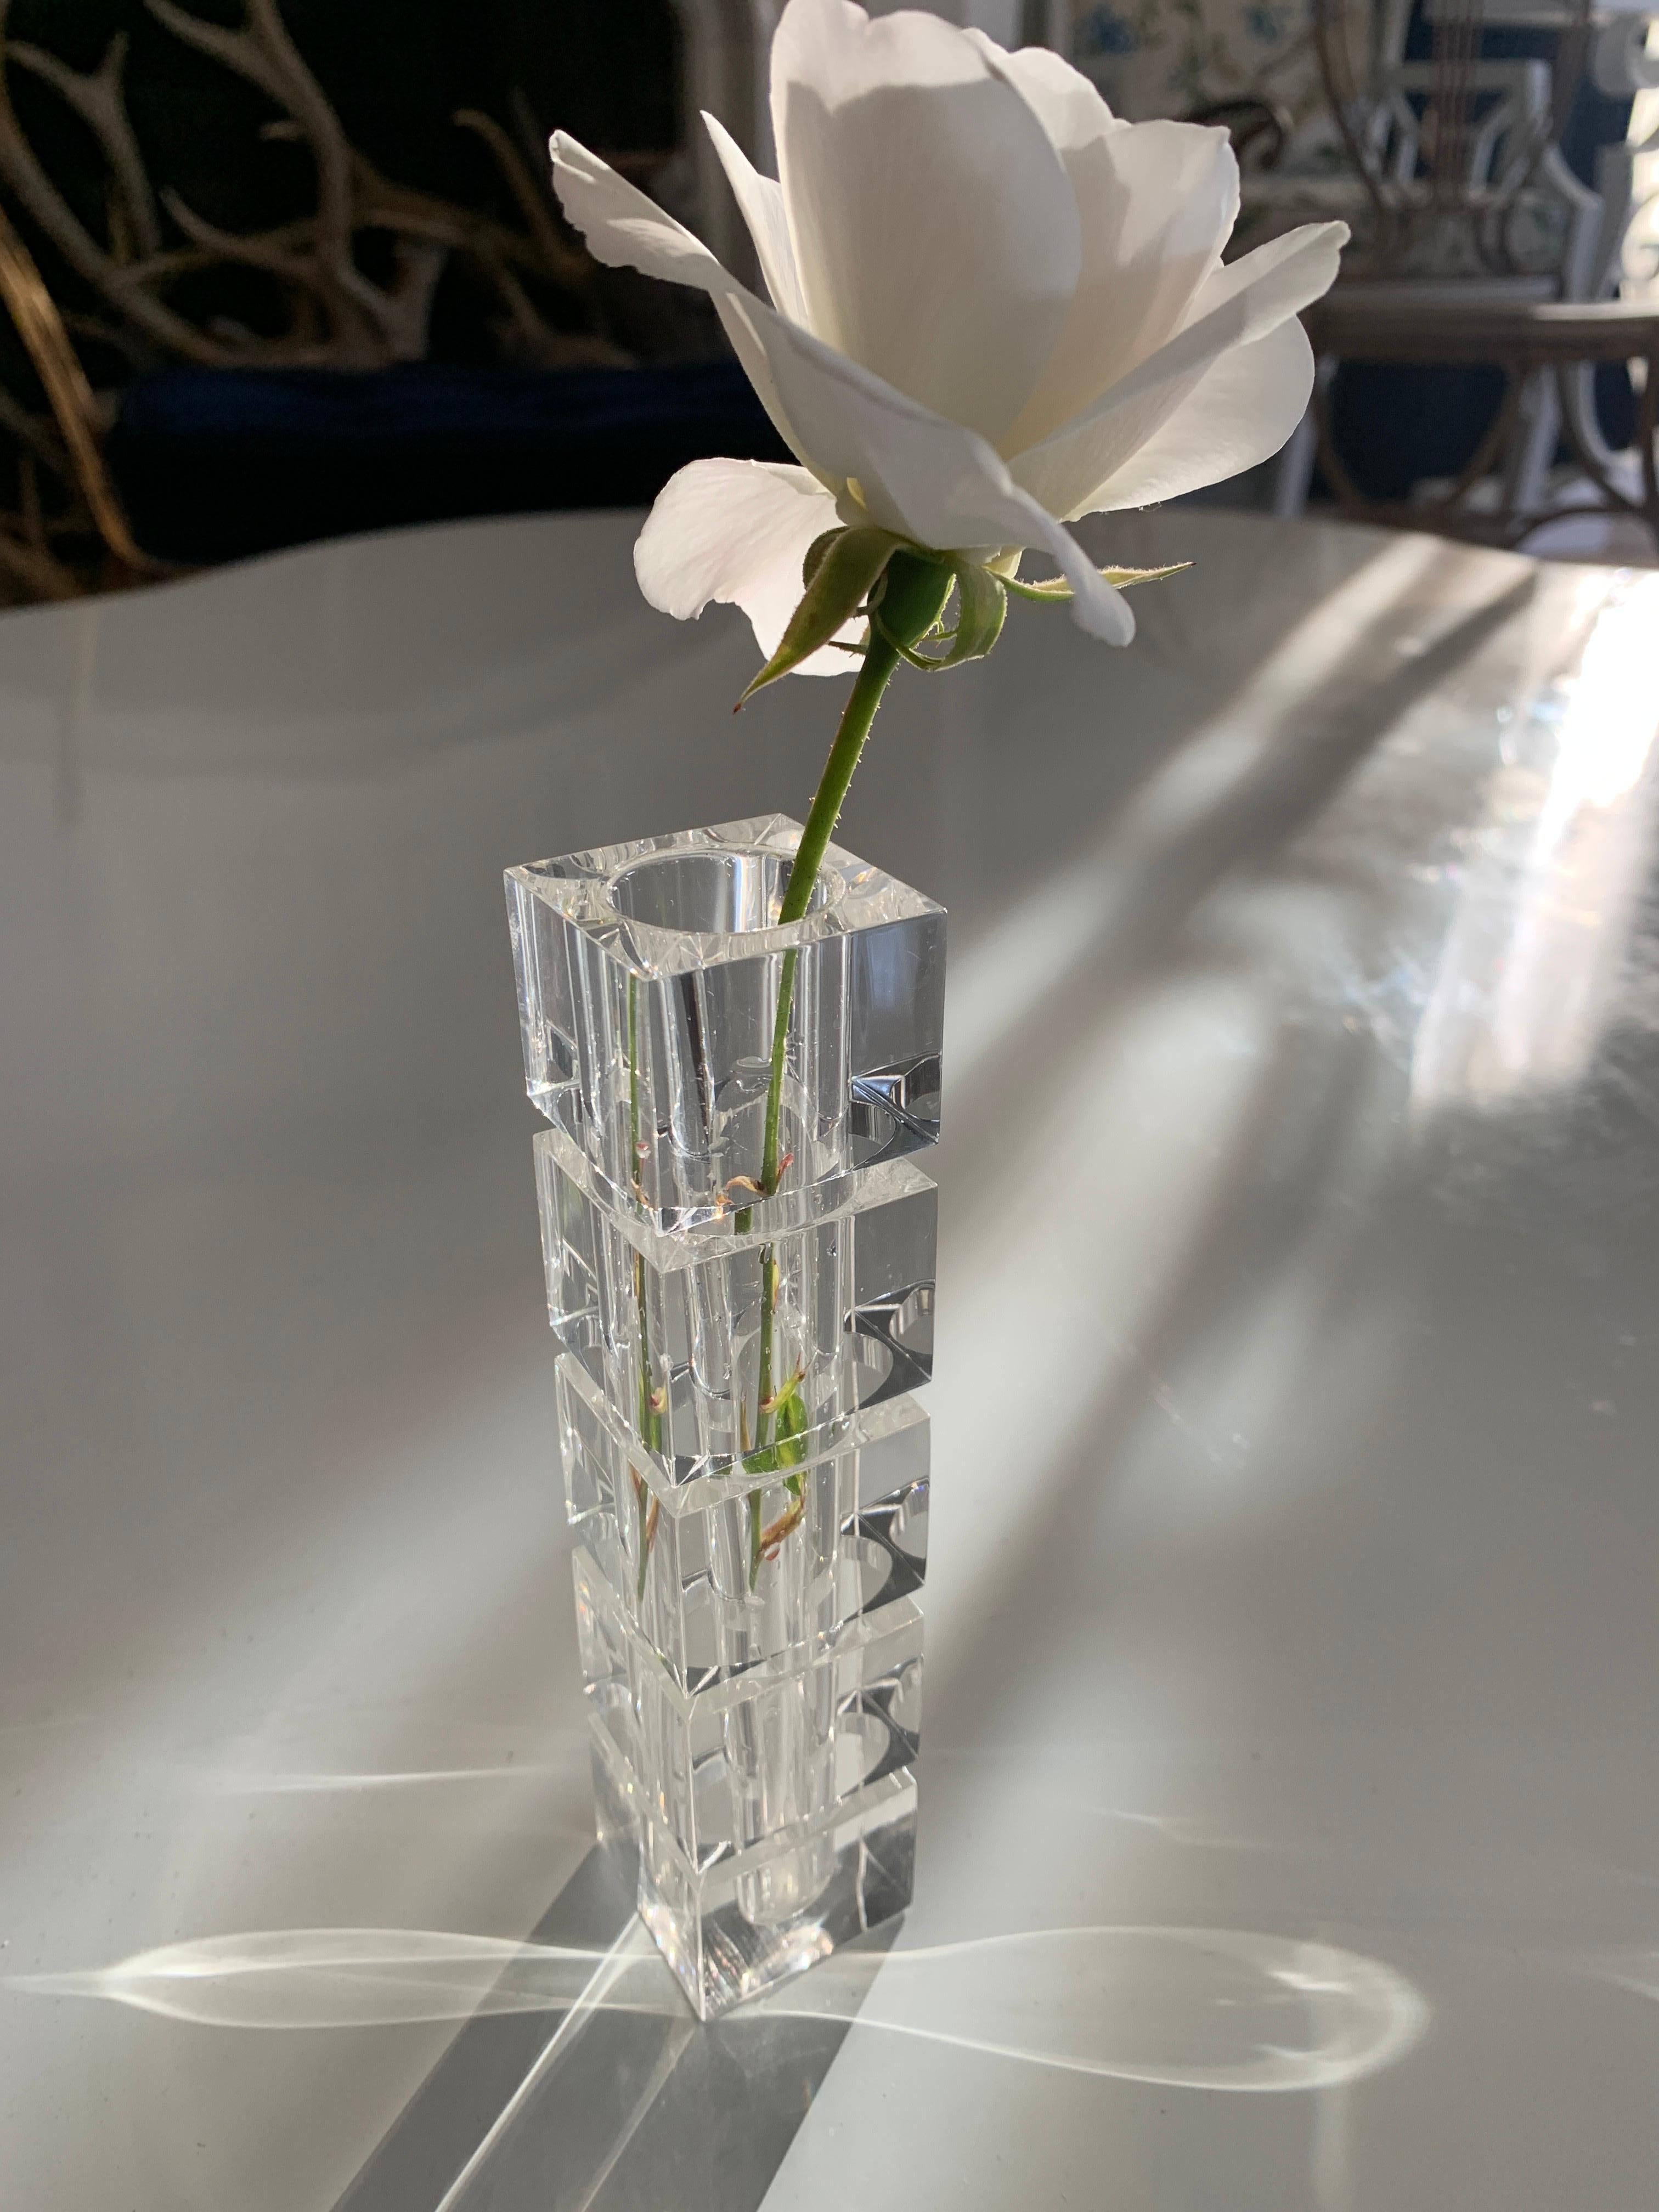 Acrylic bud vase - the way the light catches this piece you would swear it is crystal - very structurally pleasing and simple, yet stunning.